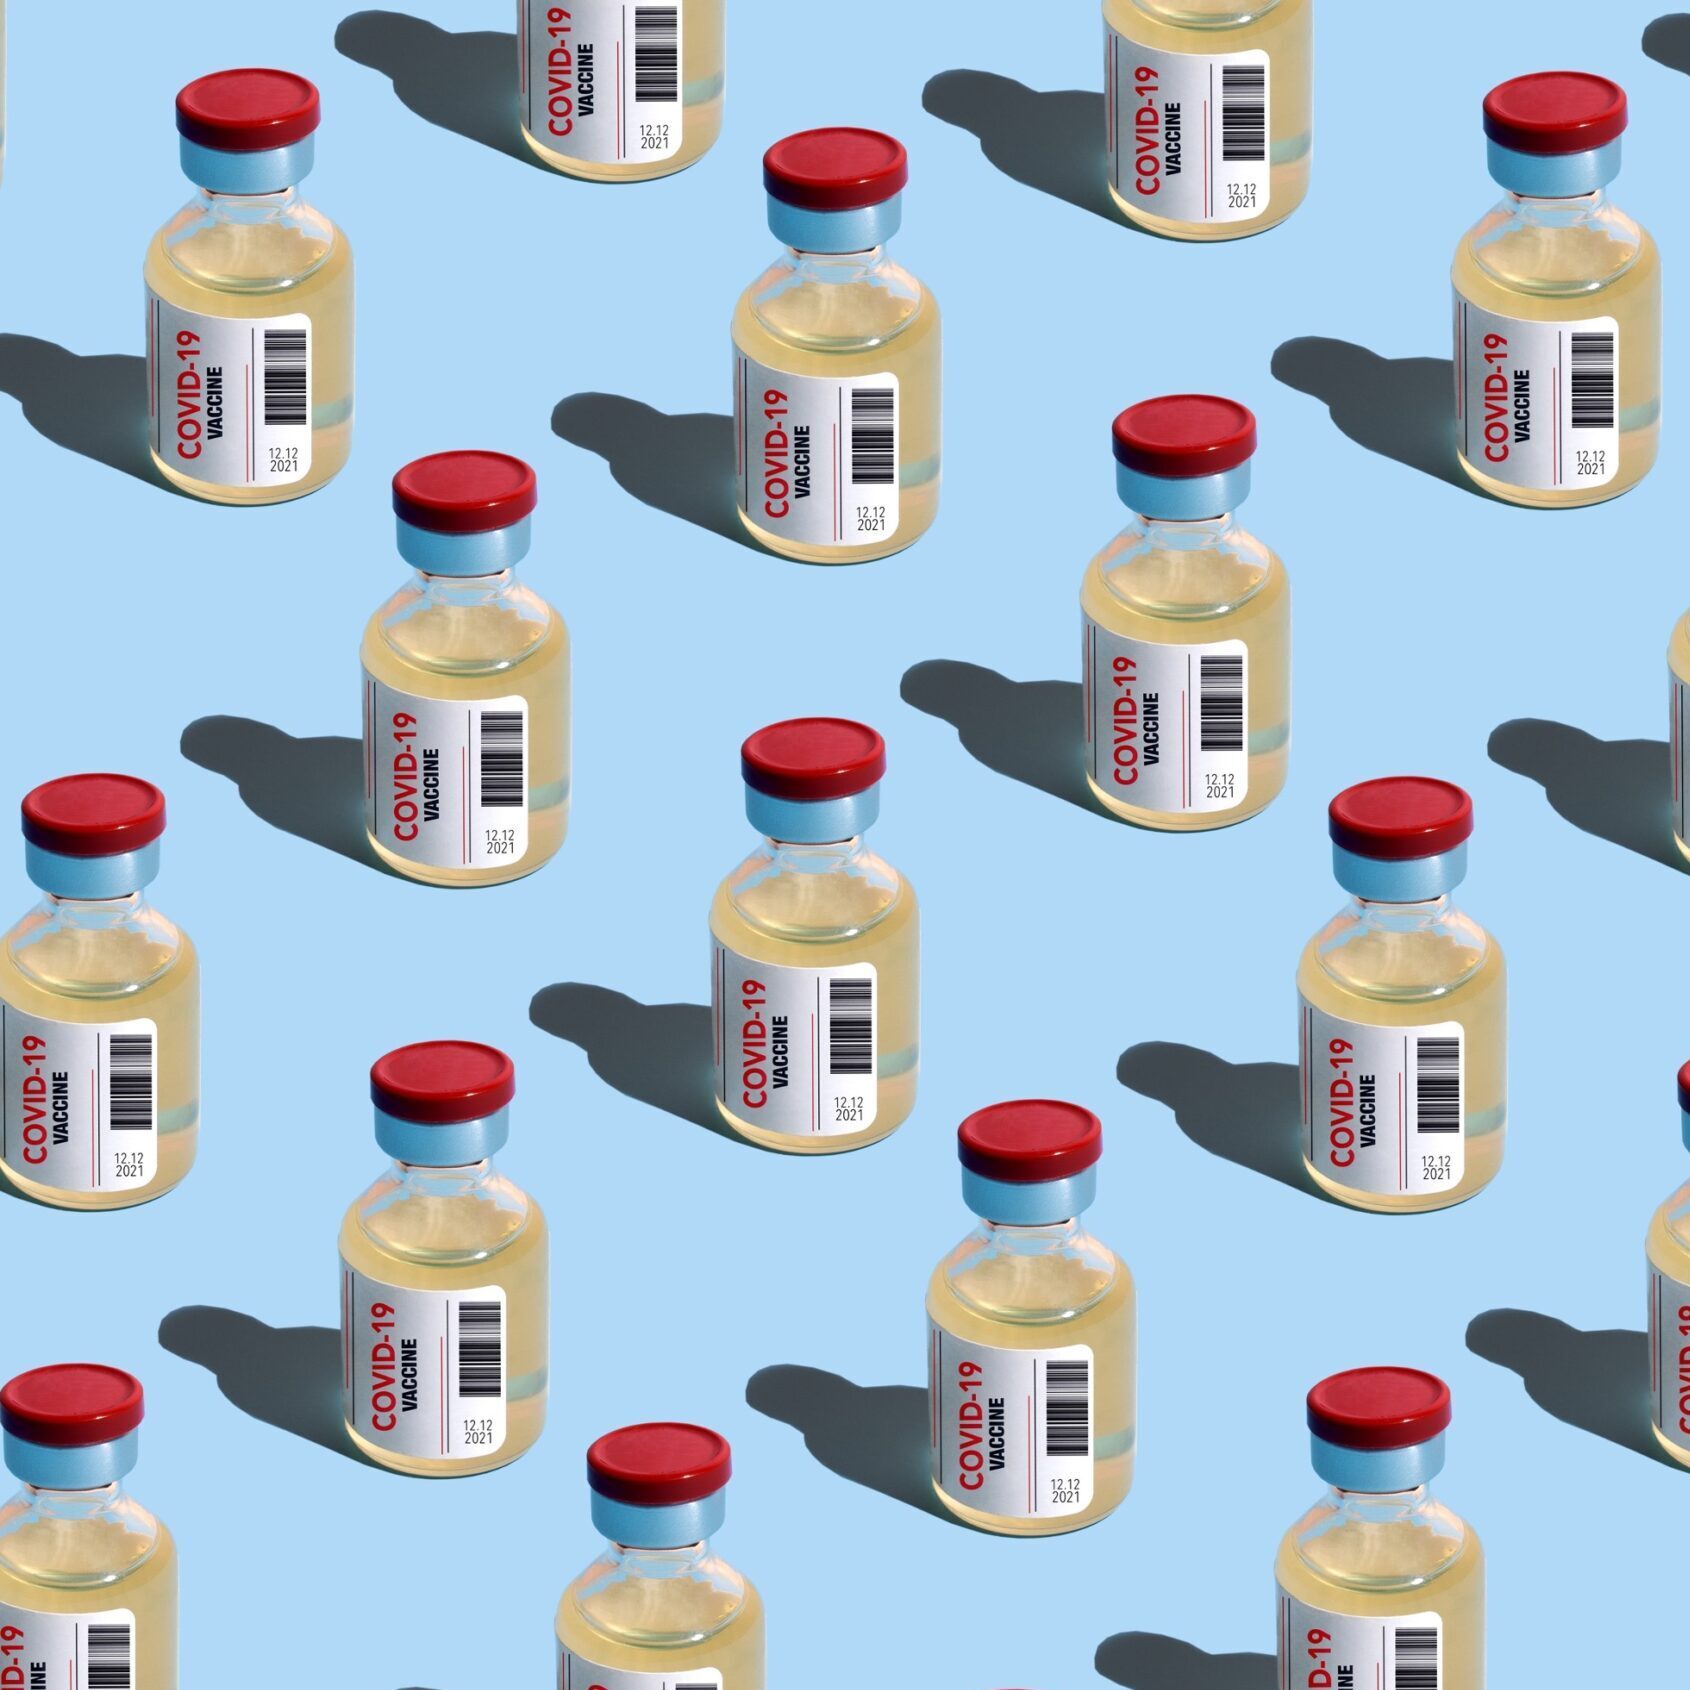 Illustrated pattern of multiple vials of C19 vaccine